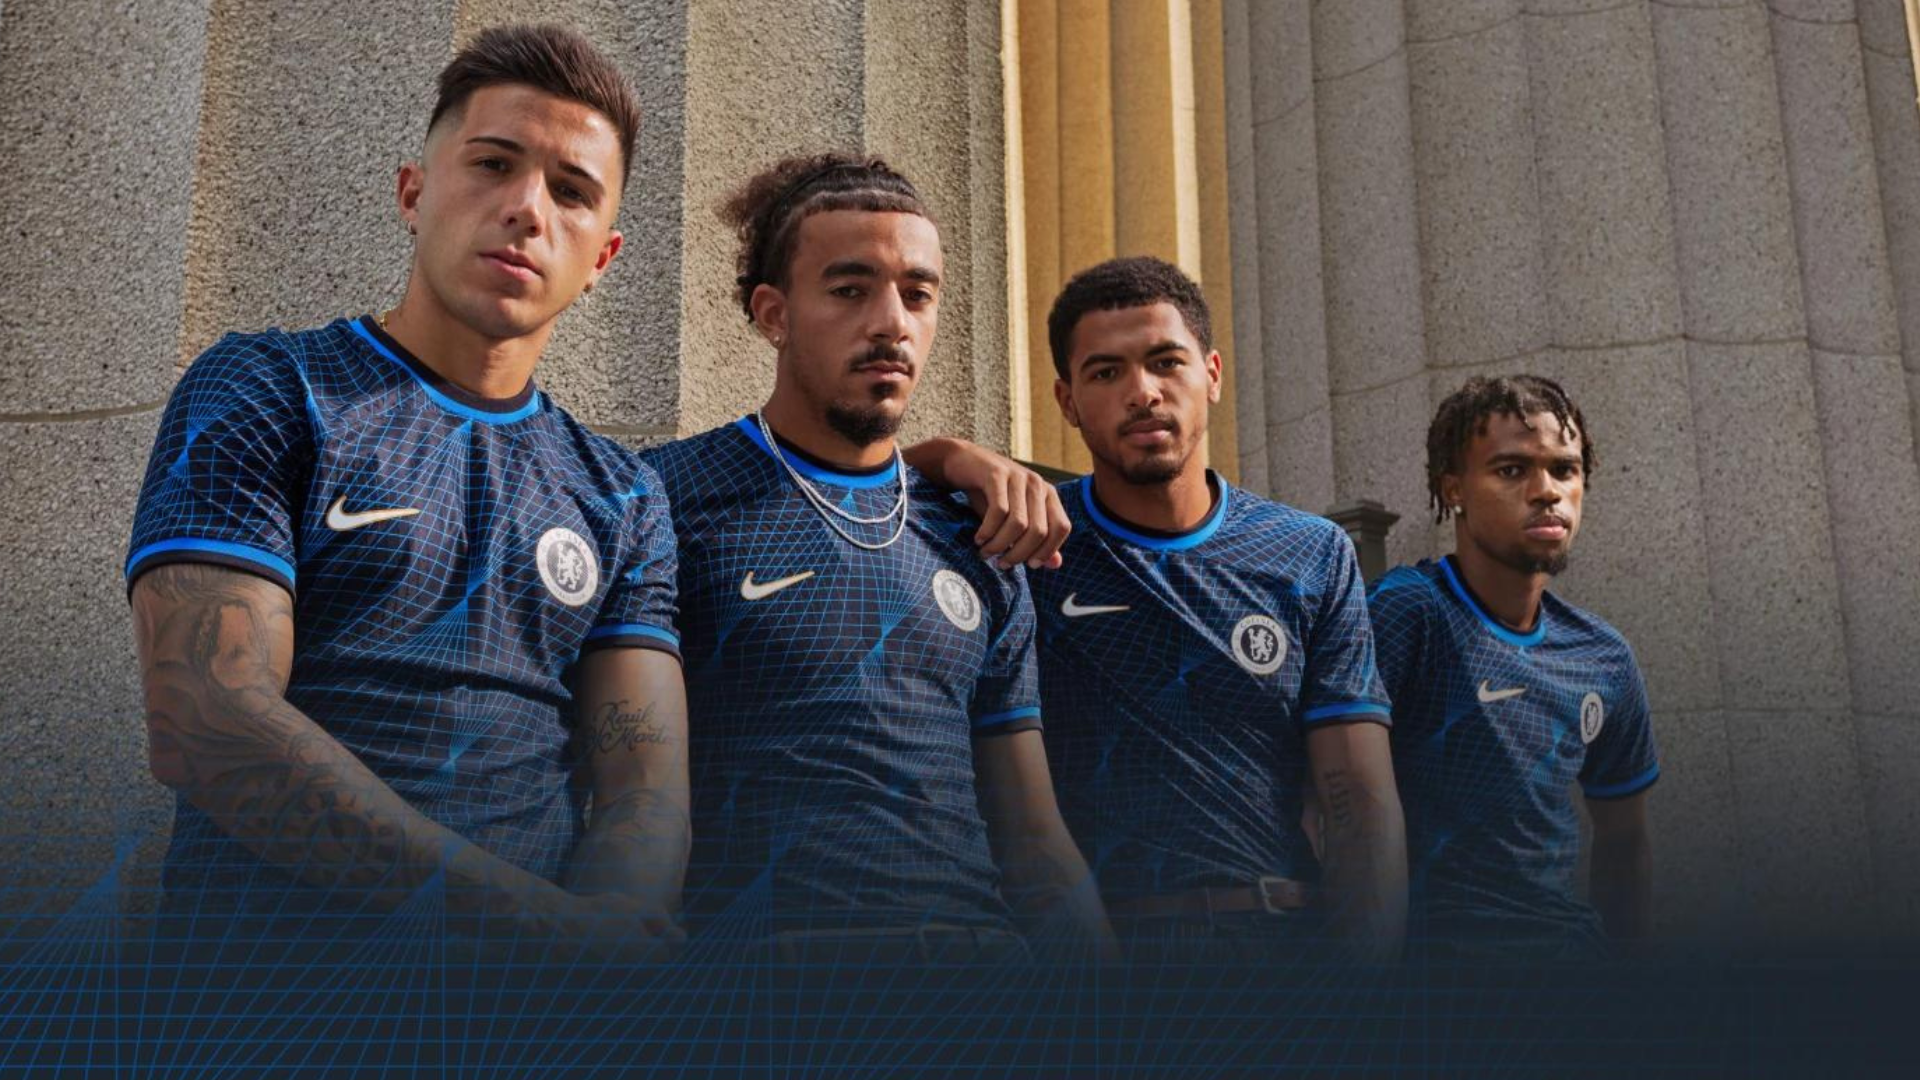 Photos of Leaked New Kits for 4 MLS Clubs Pop Up Online